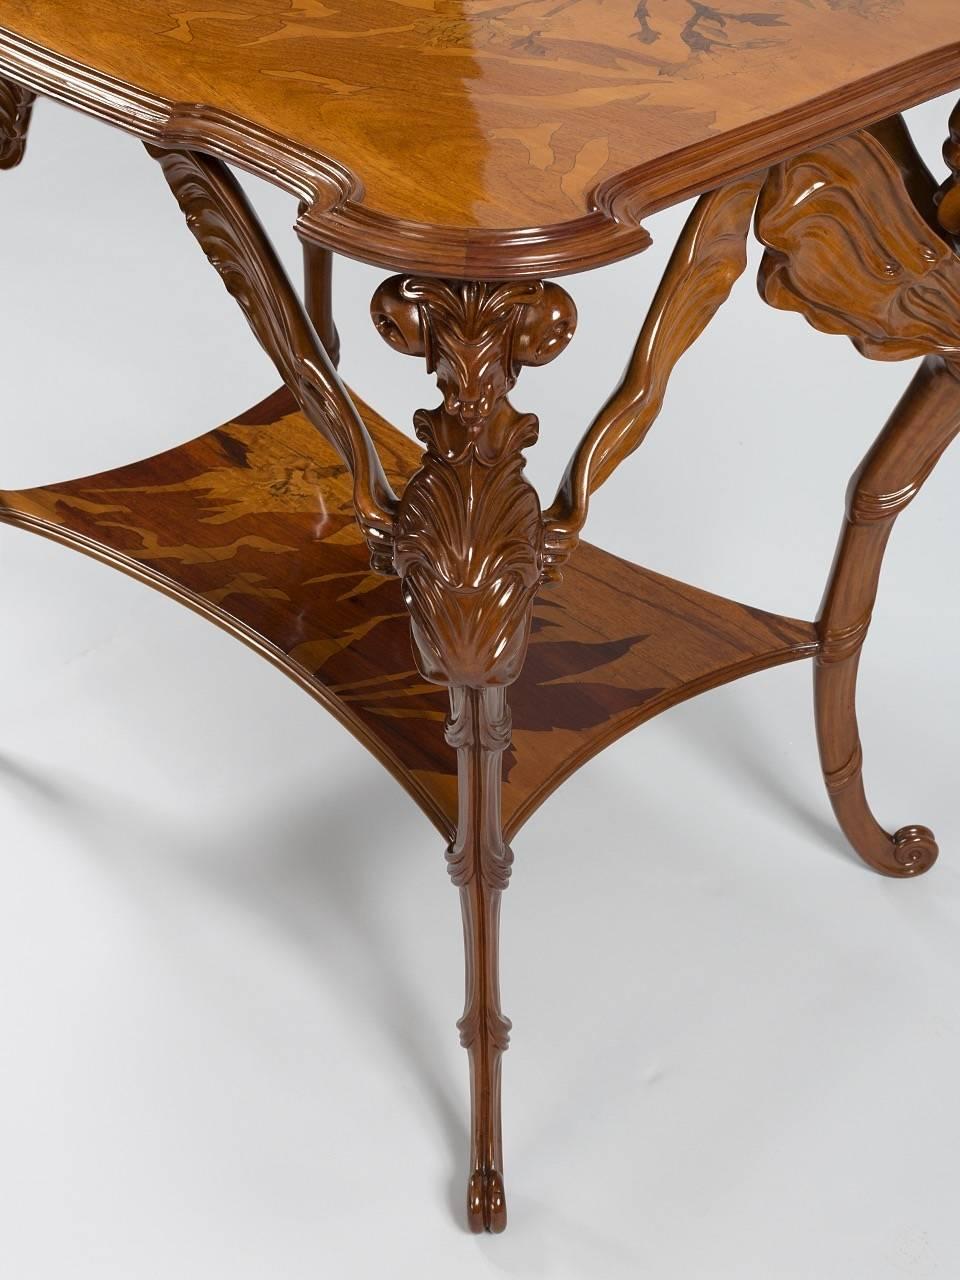 Carved French Art Nouveau Dragonfly Table by Émile Gallé